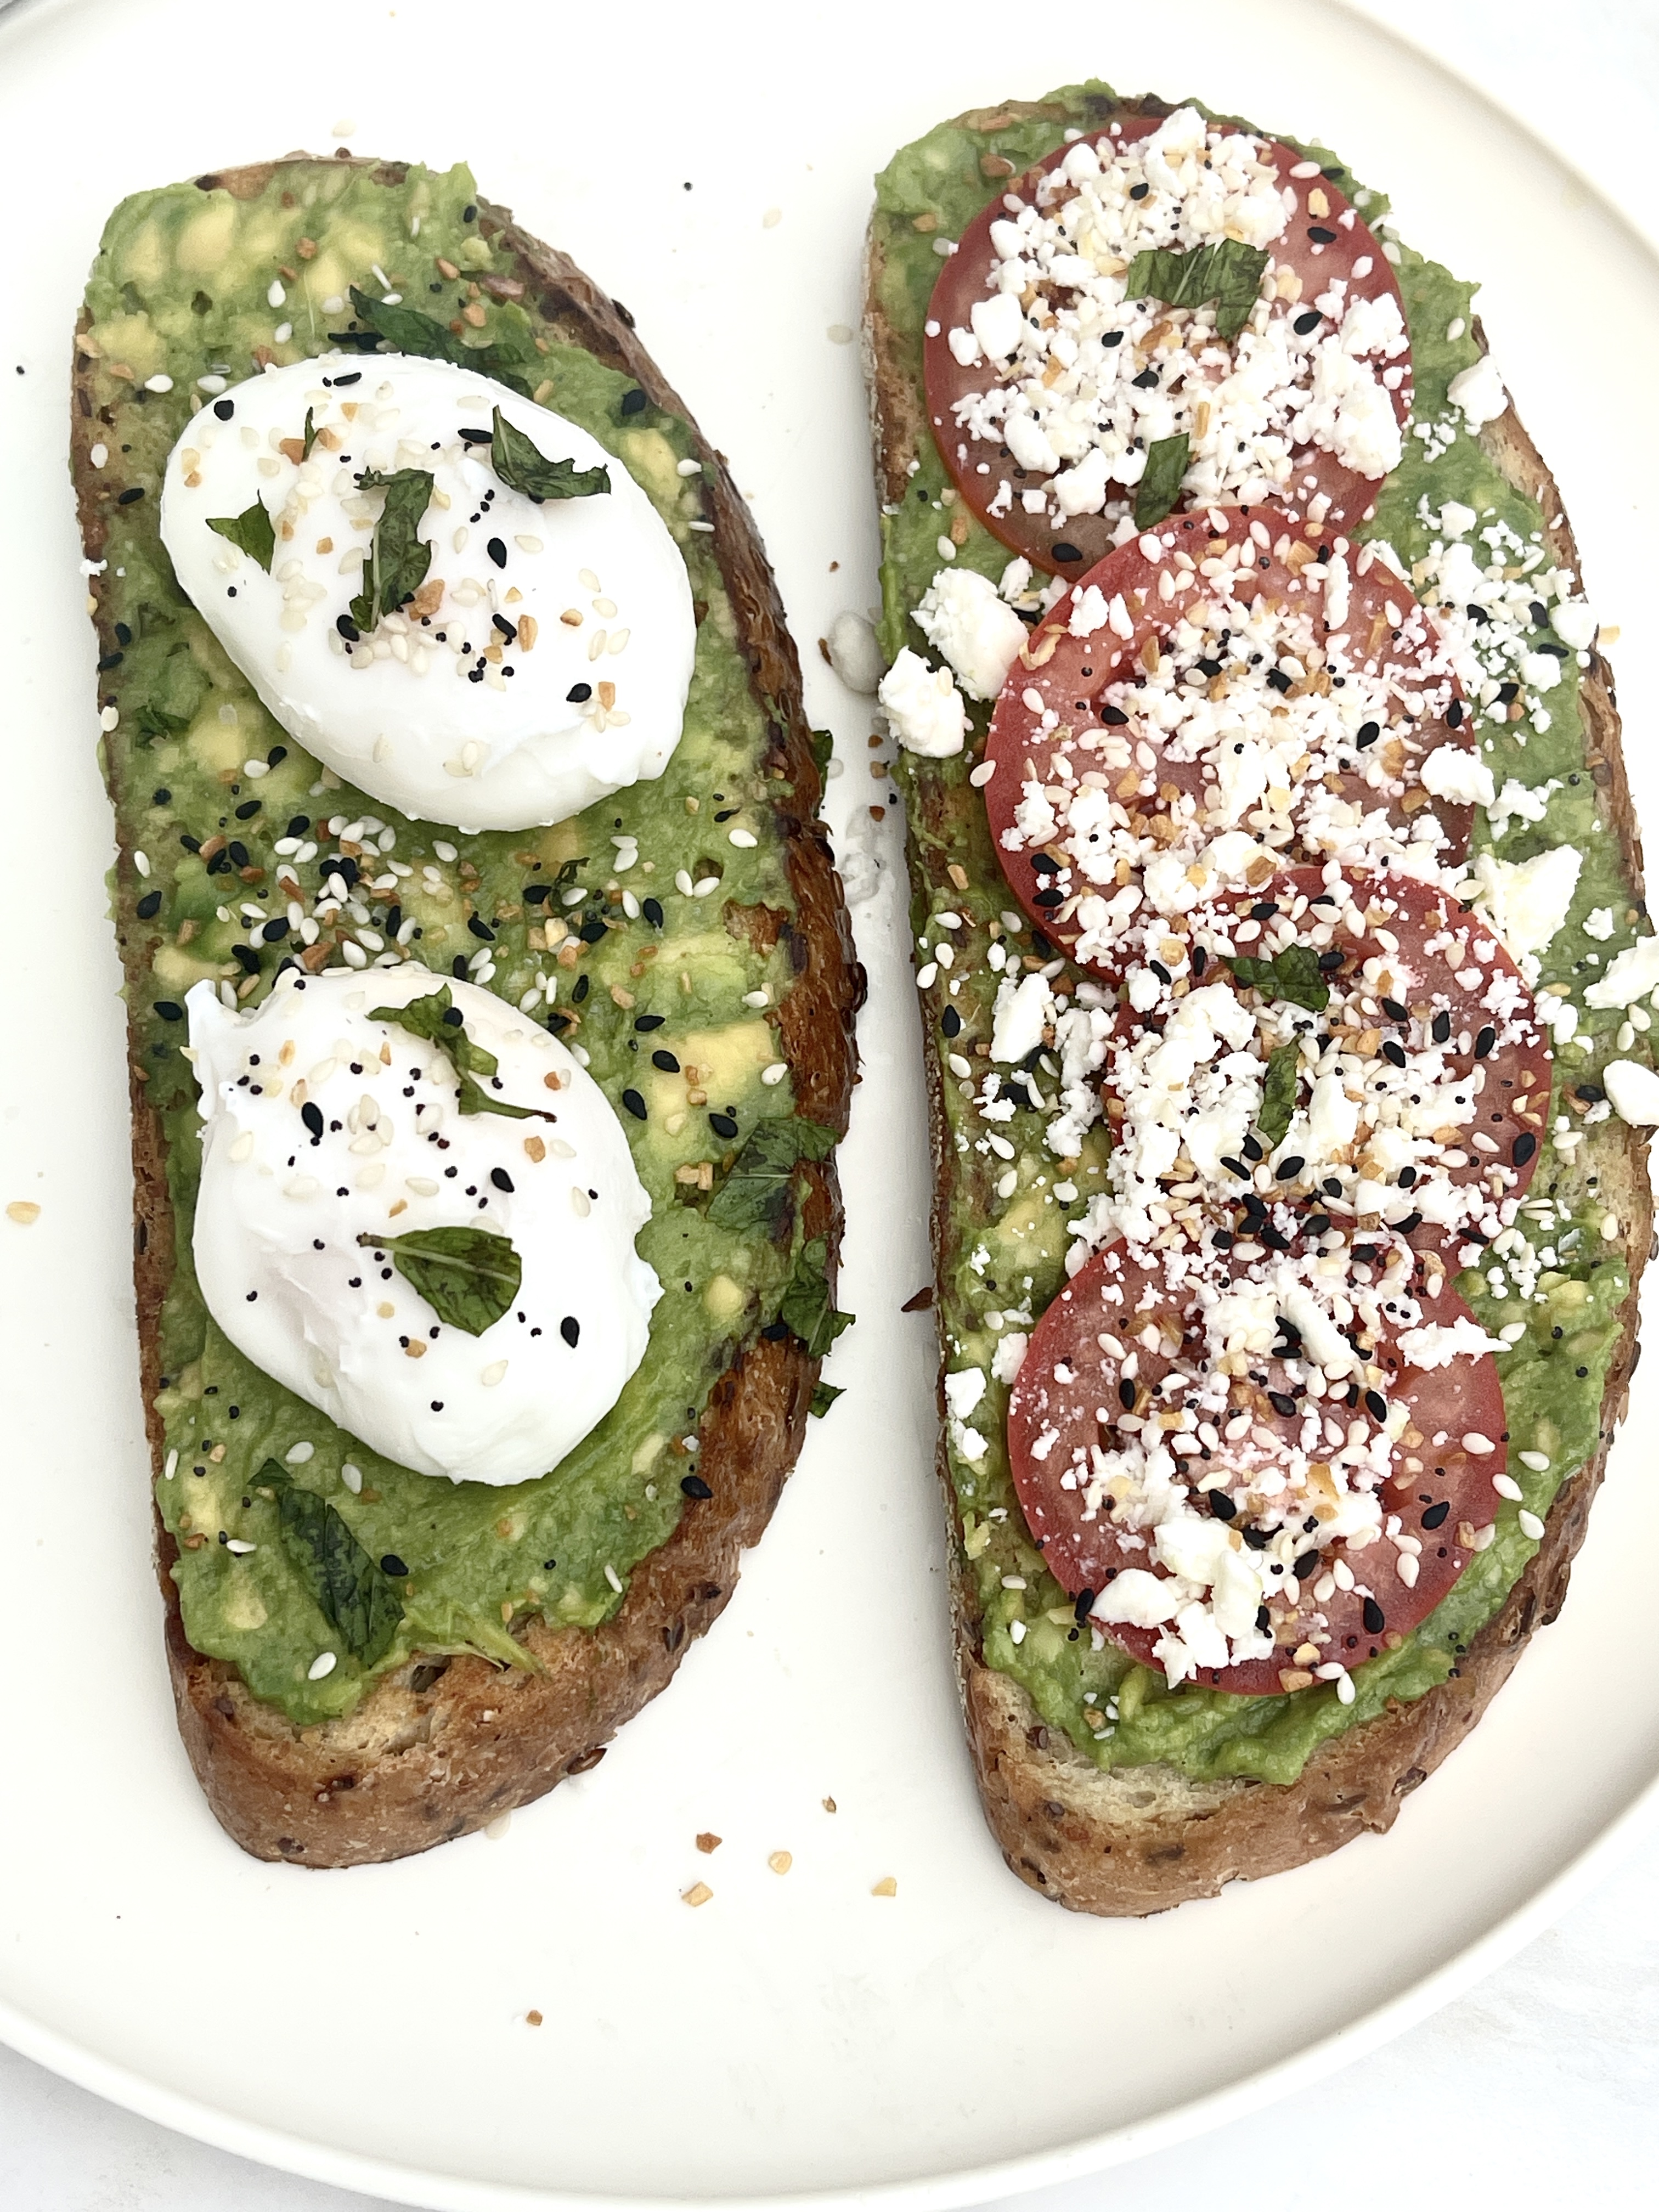 Avocado toast with tomatoes and feta cheese.